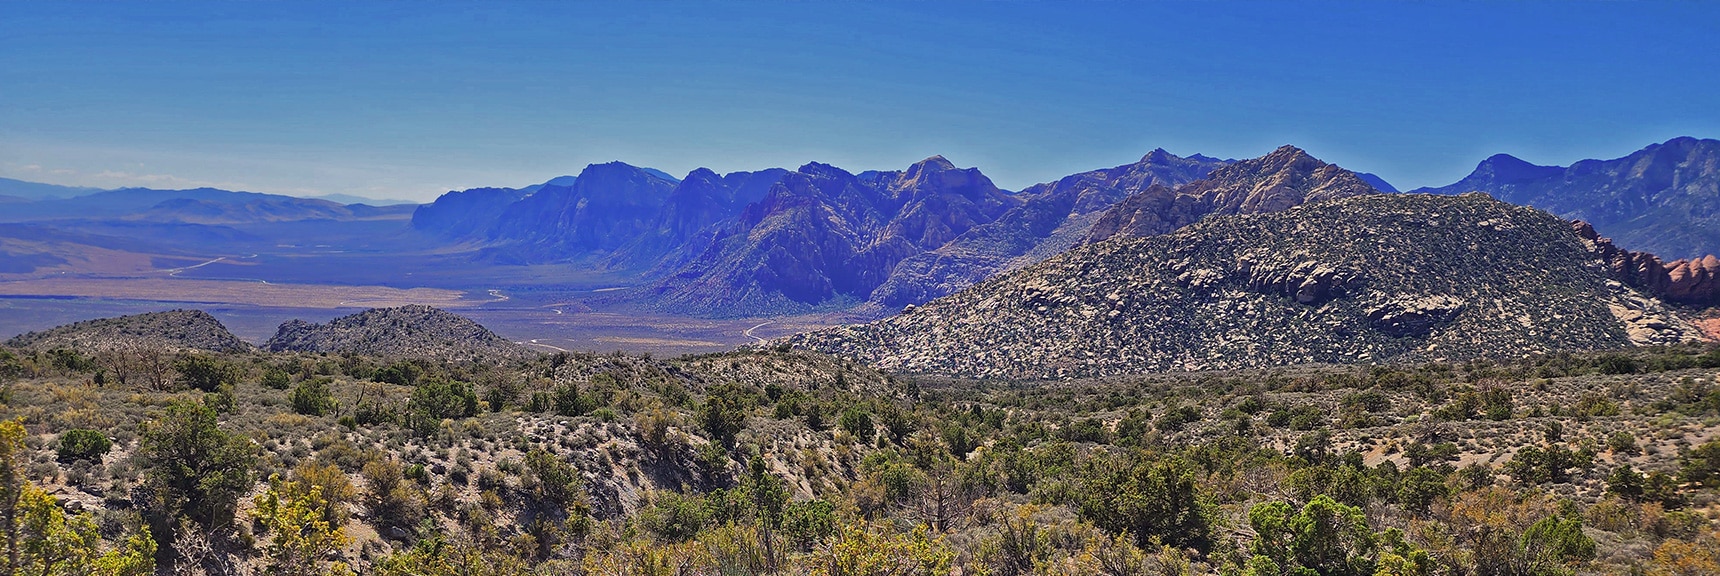 Approaching White Rock Mountain. Trailhead at Lower Left Tip | Kyle Canyon Grand Crossing | Southern Half | Red Rock Canyon National Conservation Area, Nevada